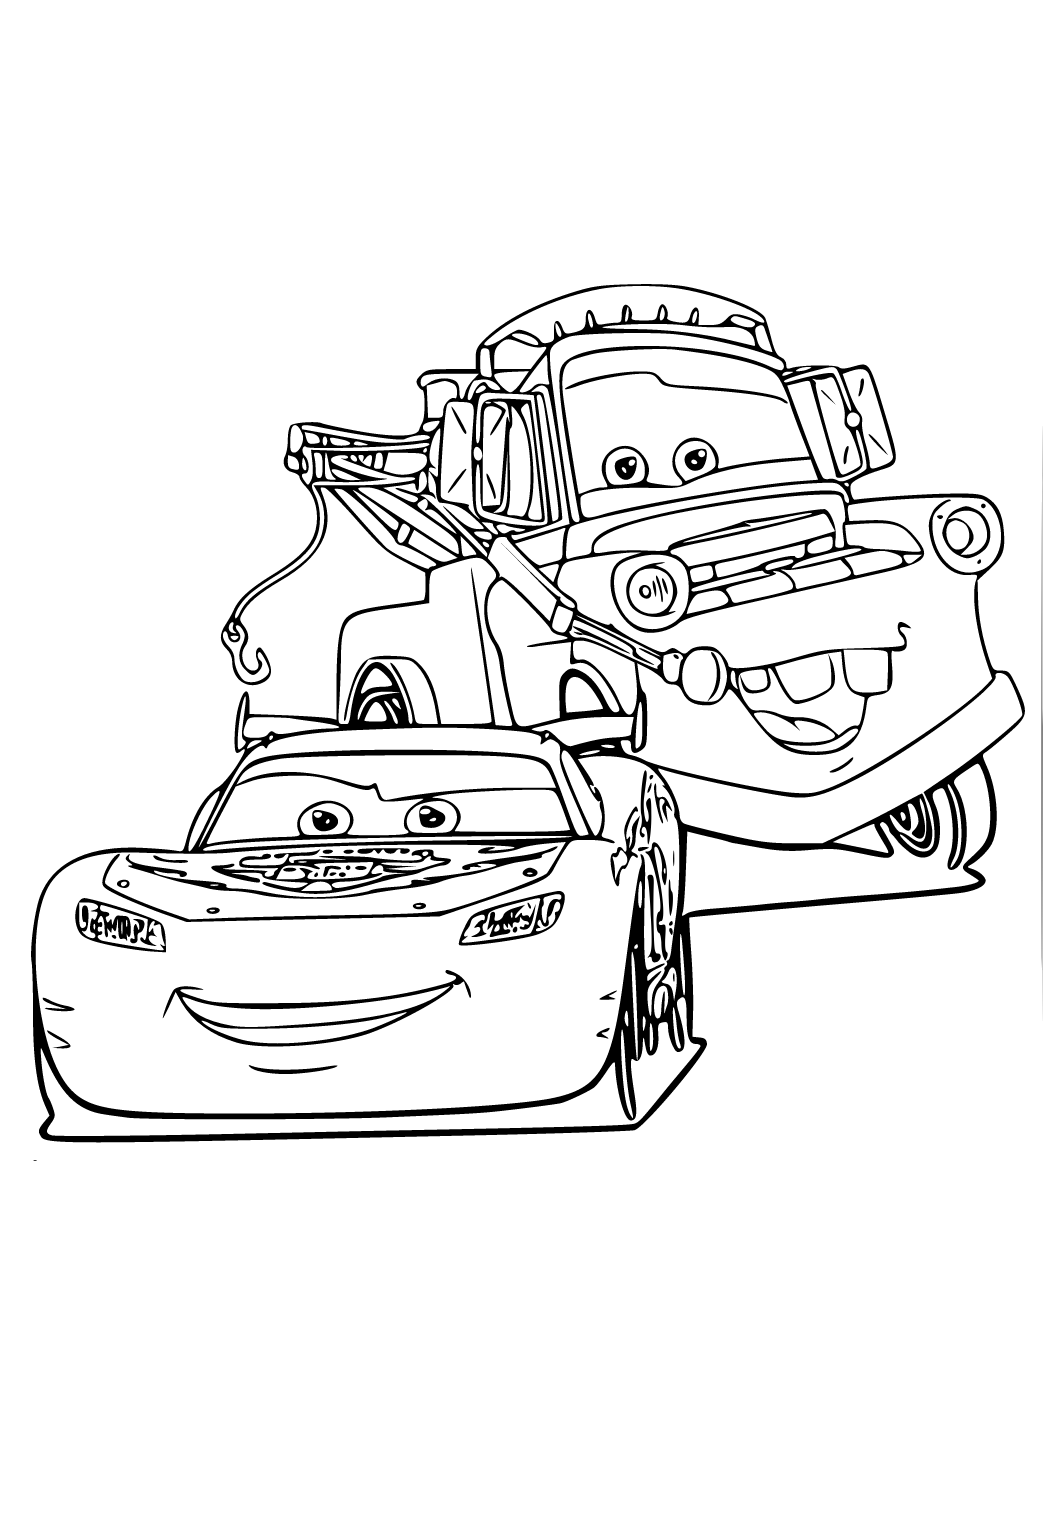 Free printable cars lightning mcqueen and mater coloring page sheet and picture for adults and kids girls and boys